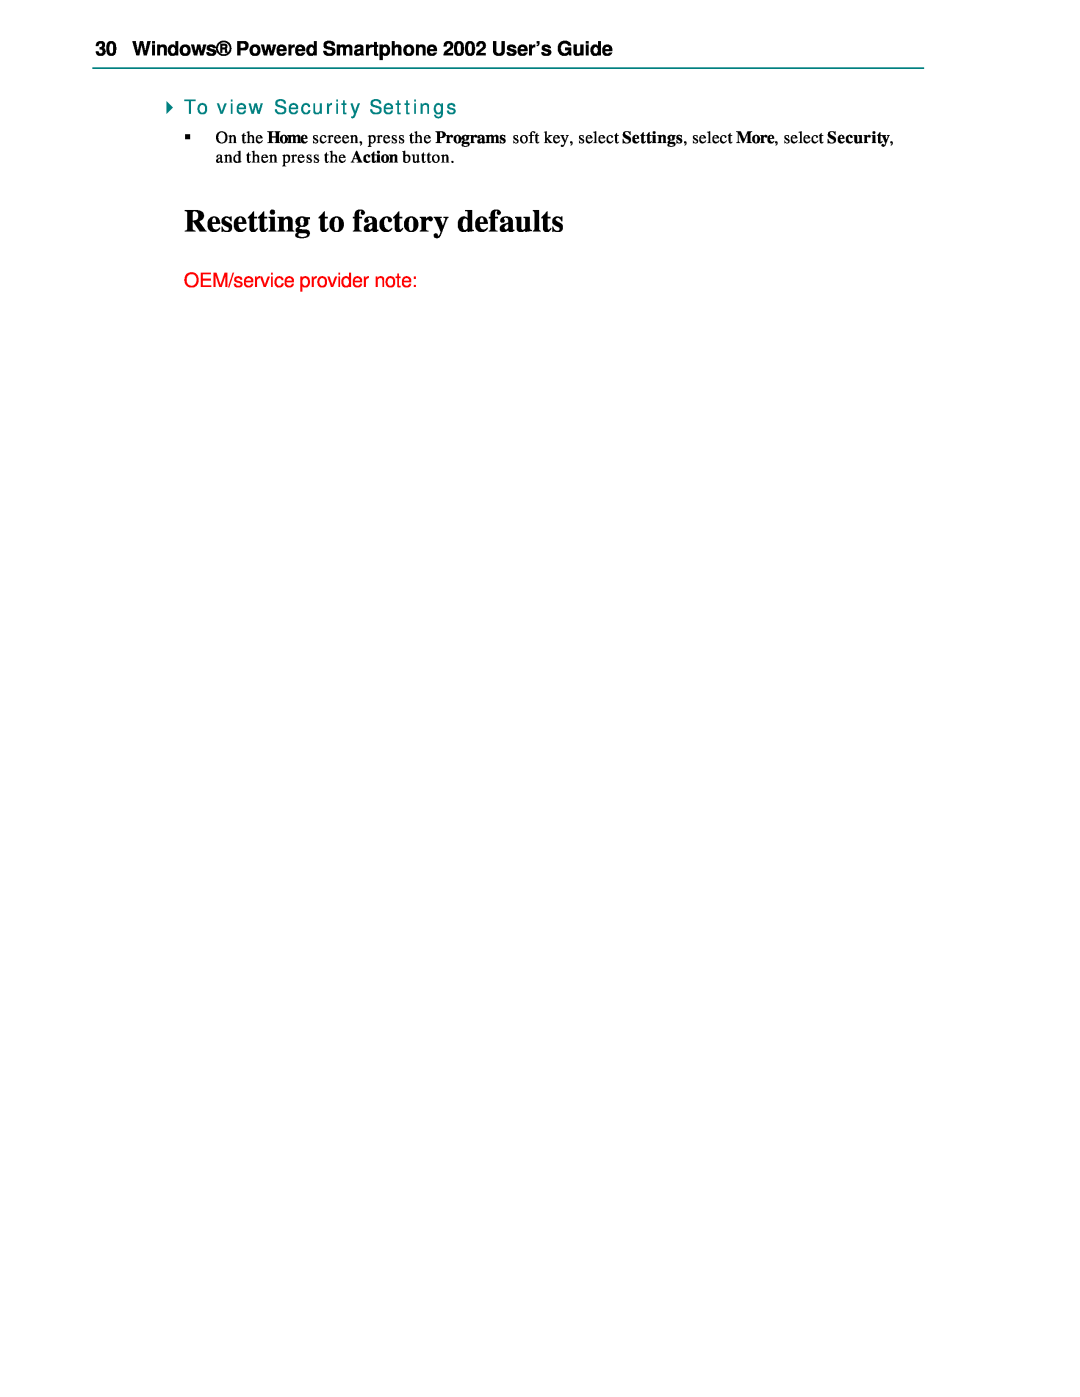 Microsoft manual Resetting to factory defaults, Windows Powered Smartphone 2002 User’s Guide, To view Security Settings 